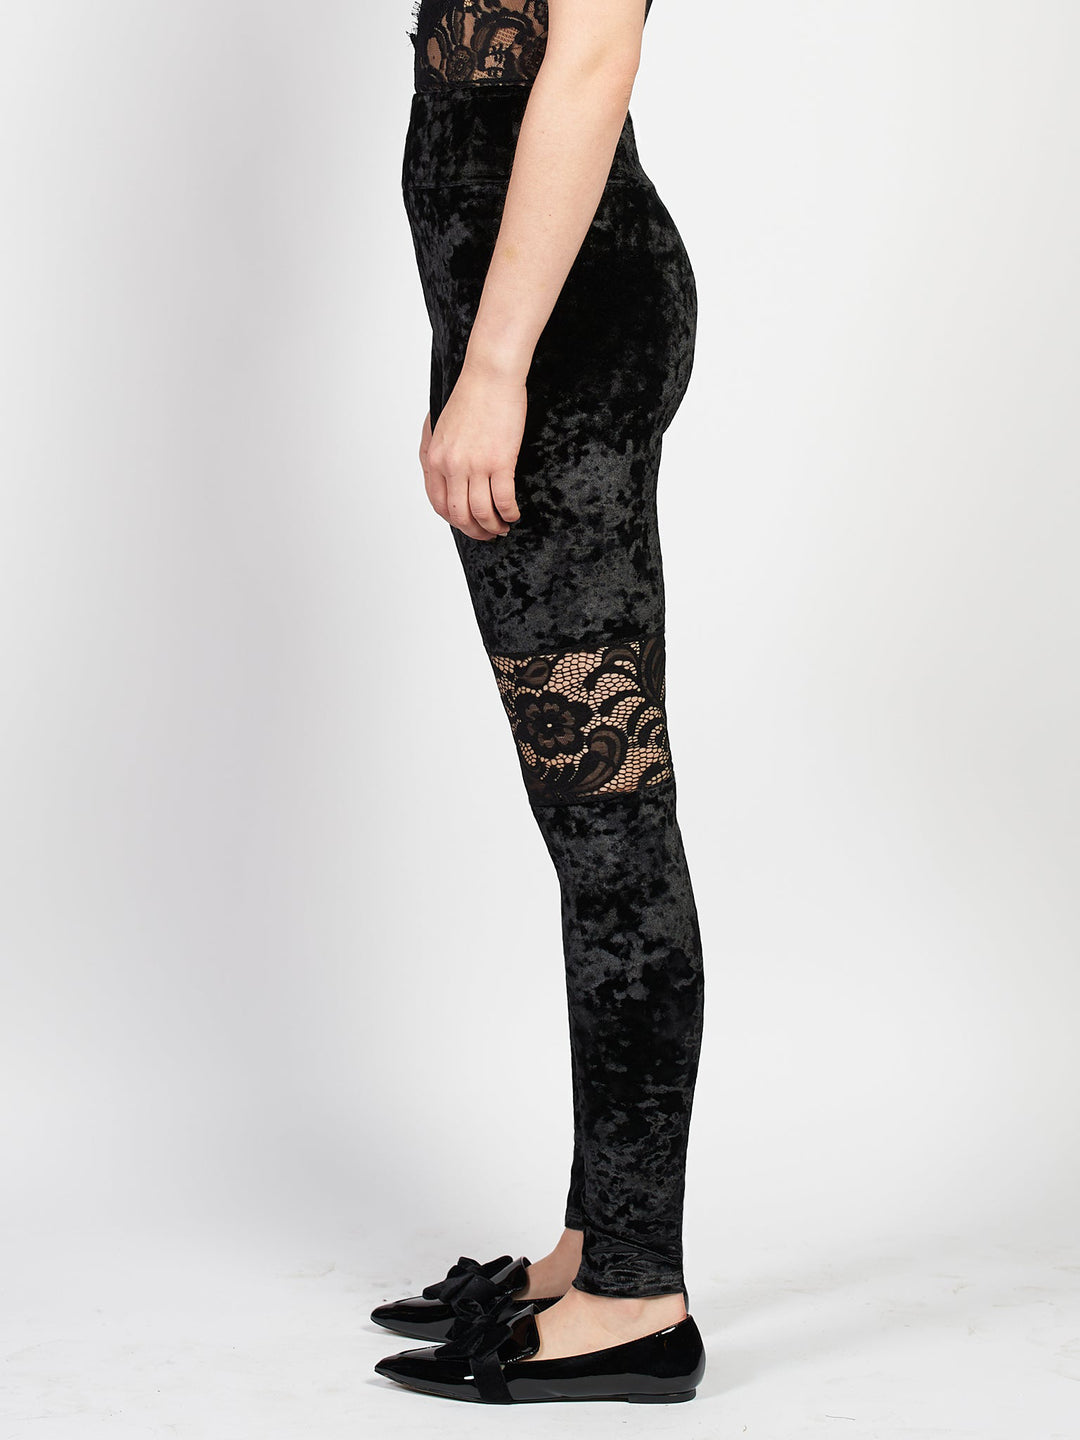 LACE LEGGINGS WOMENS Nude and Black Lace Paisley Print Leggings Yoga Pants  for Women Lace Print Sexy Leggings Tribal Tights Tattoo Tights -   Portugal